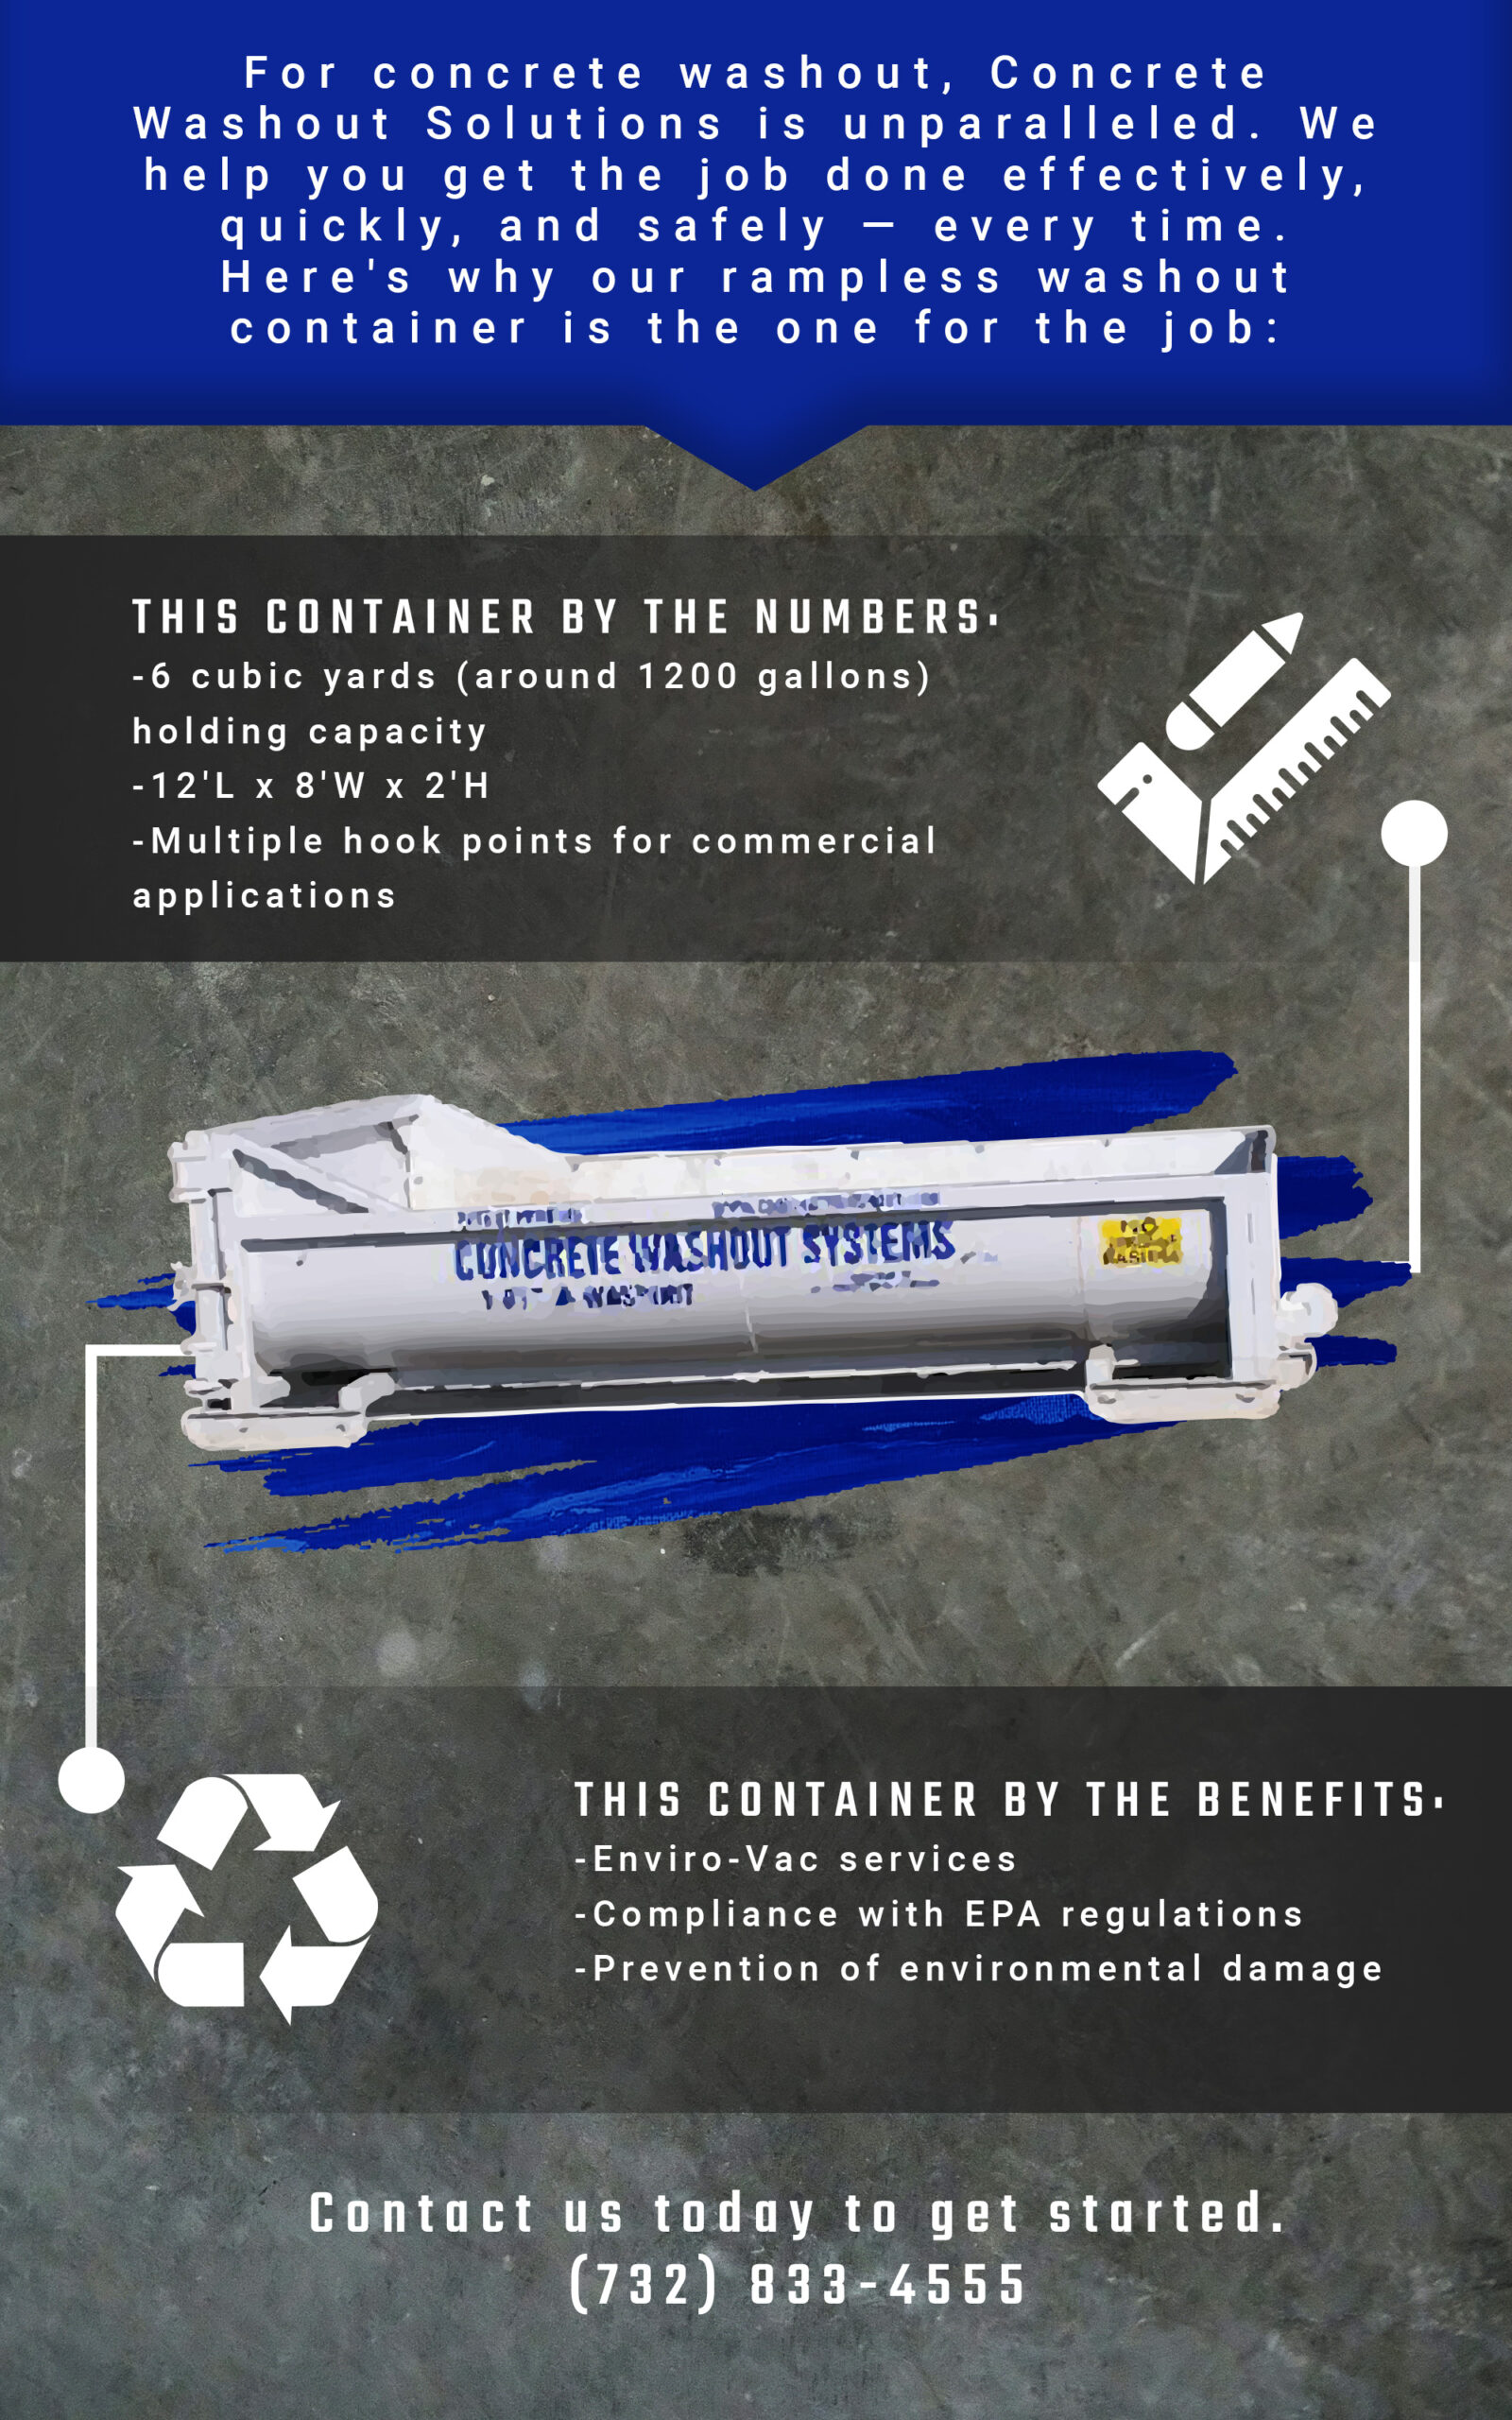 Infographic detailing the benefits of rampless washout containers.